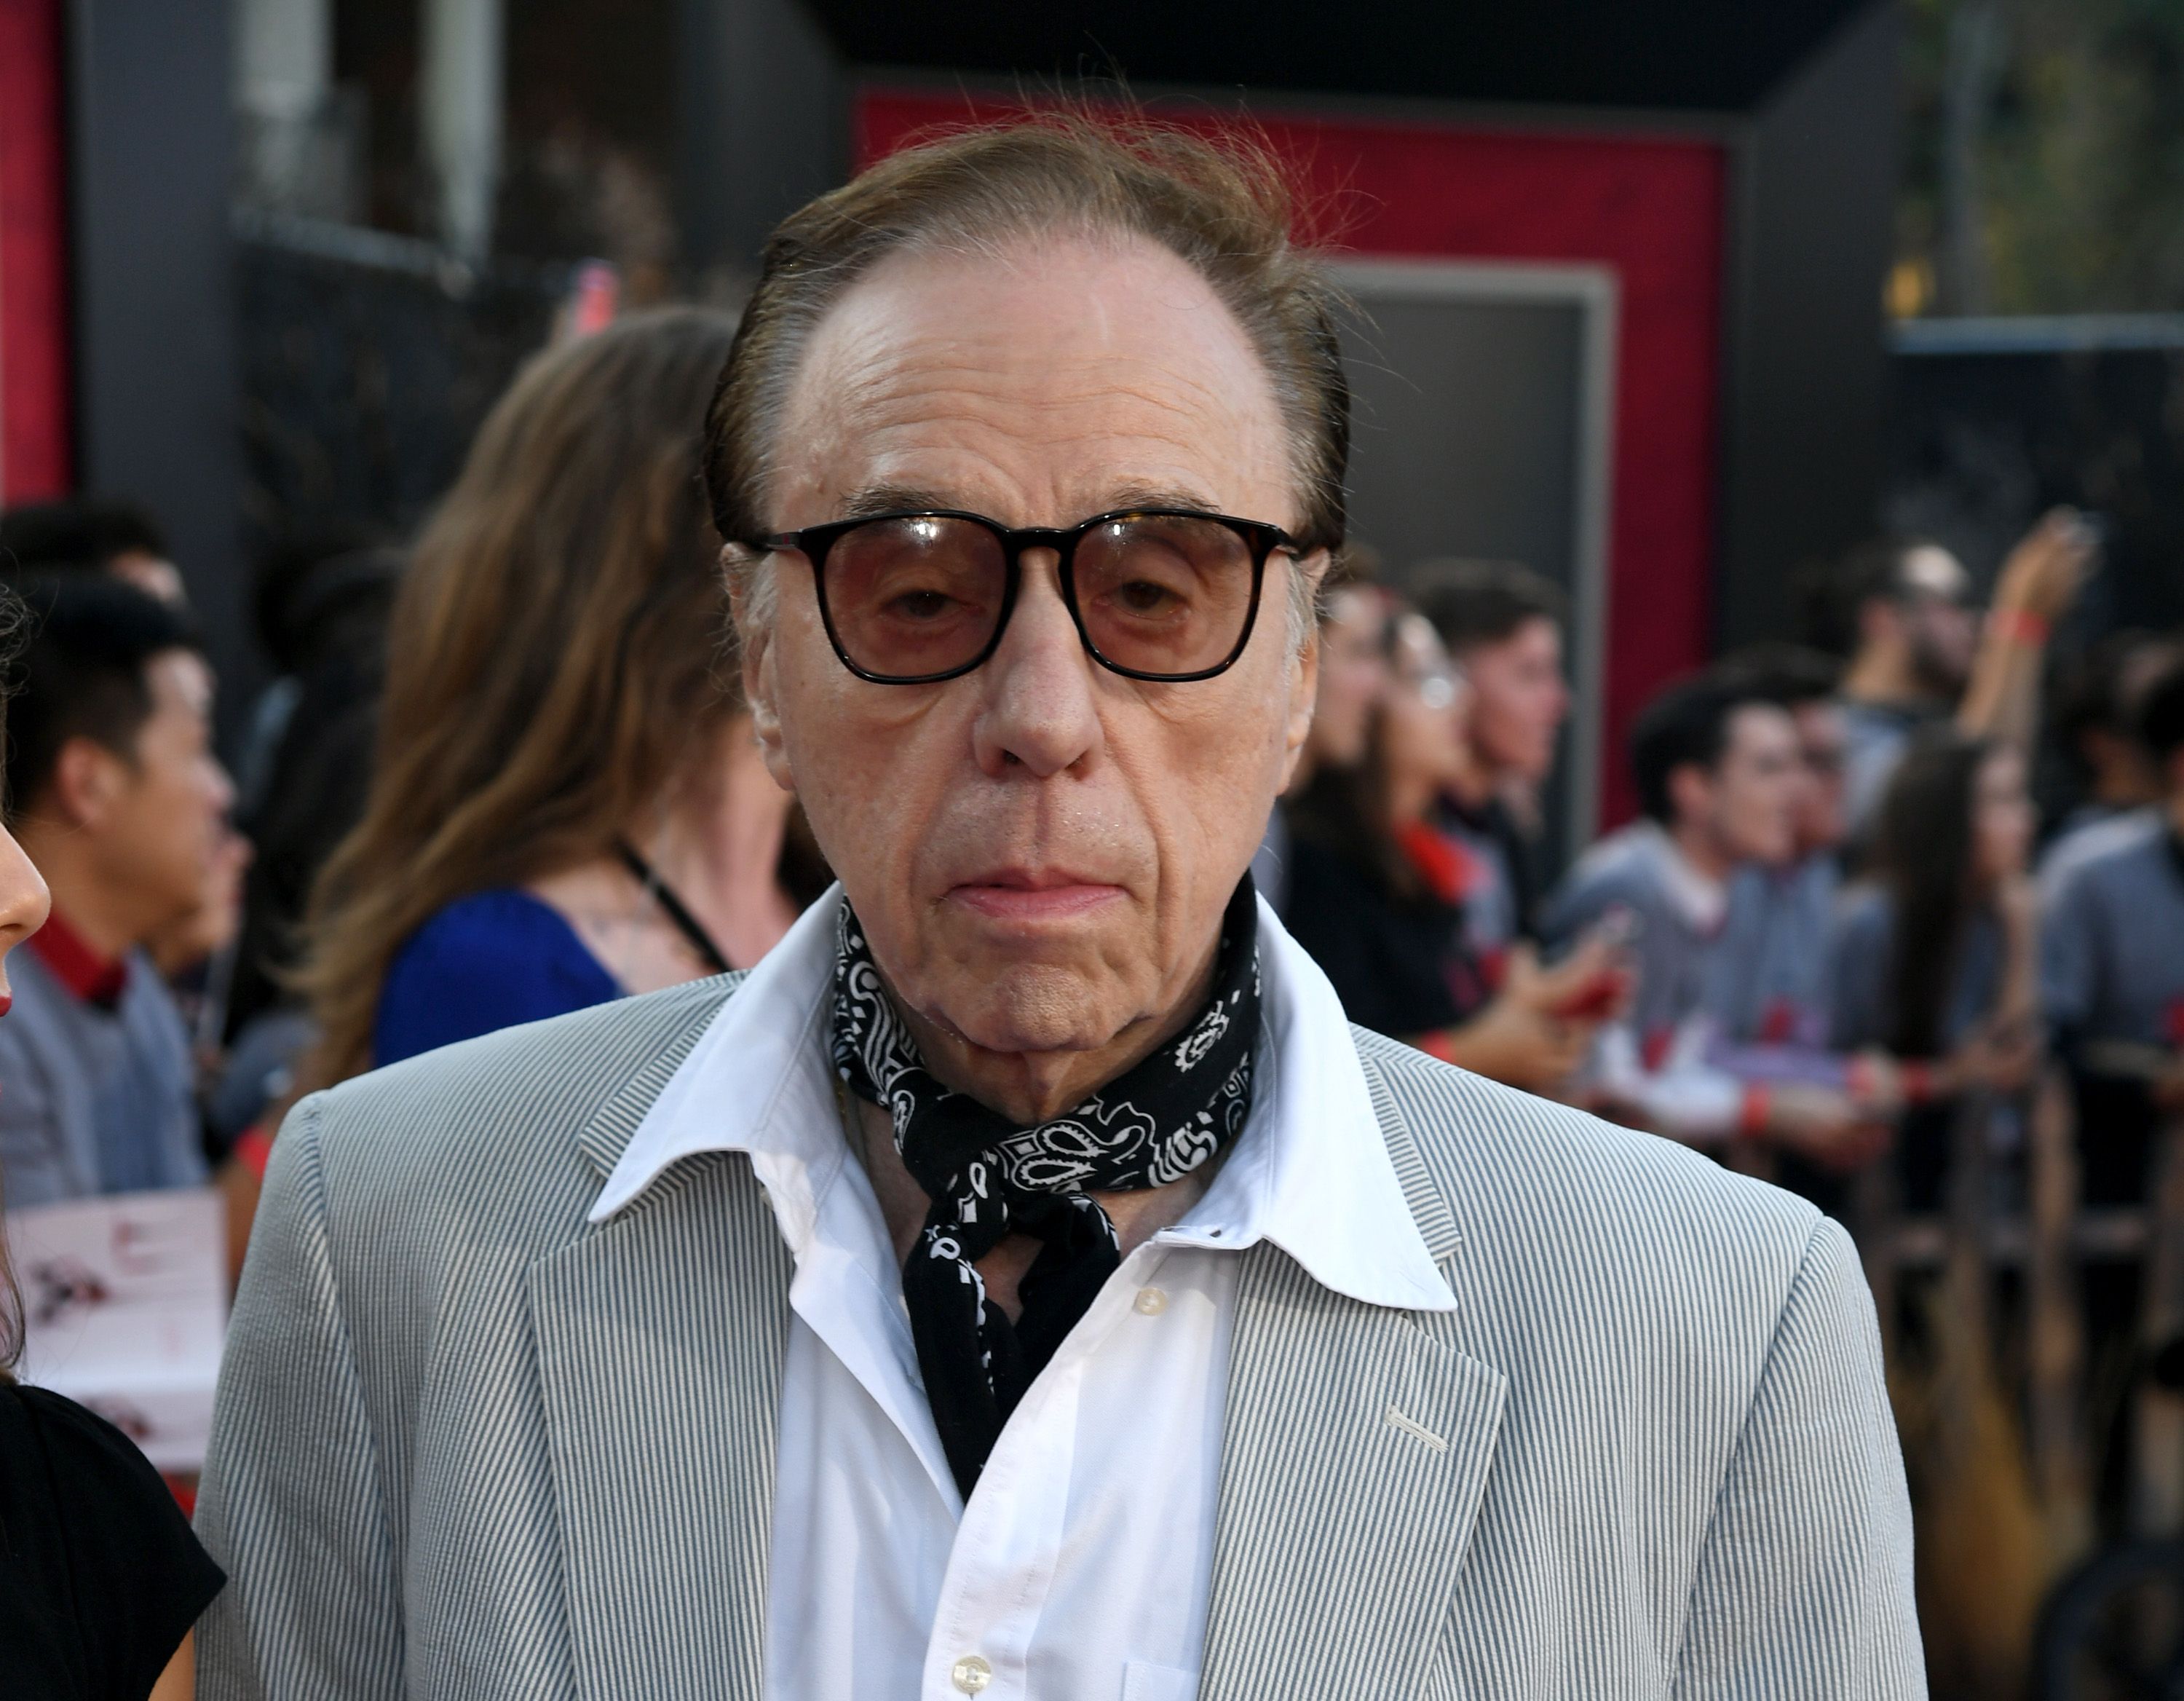 Peter Bogdanovich at the premiere of Warner Bros. Pictures" "It Chapter Two" at Regency Village Theatre on August 26, 2019 | Photo: Getty Images